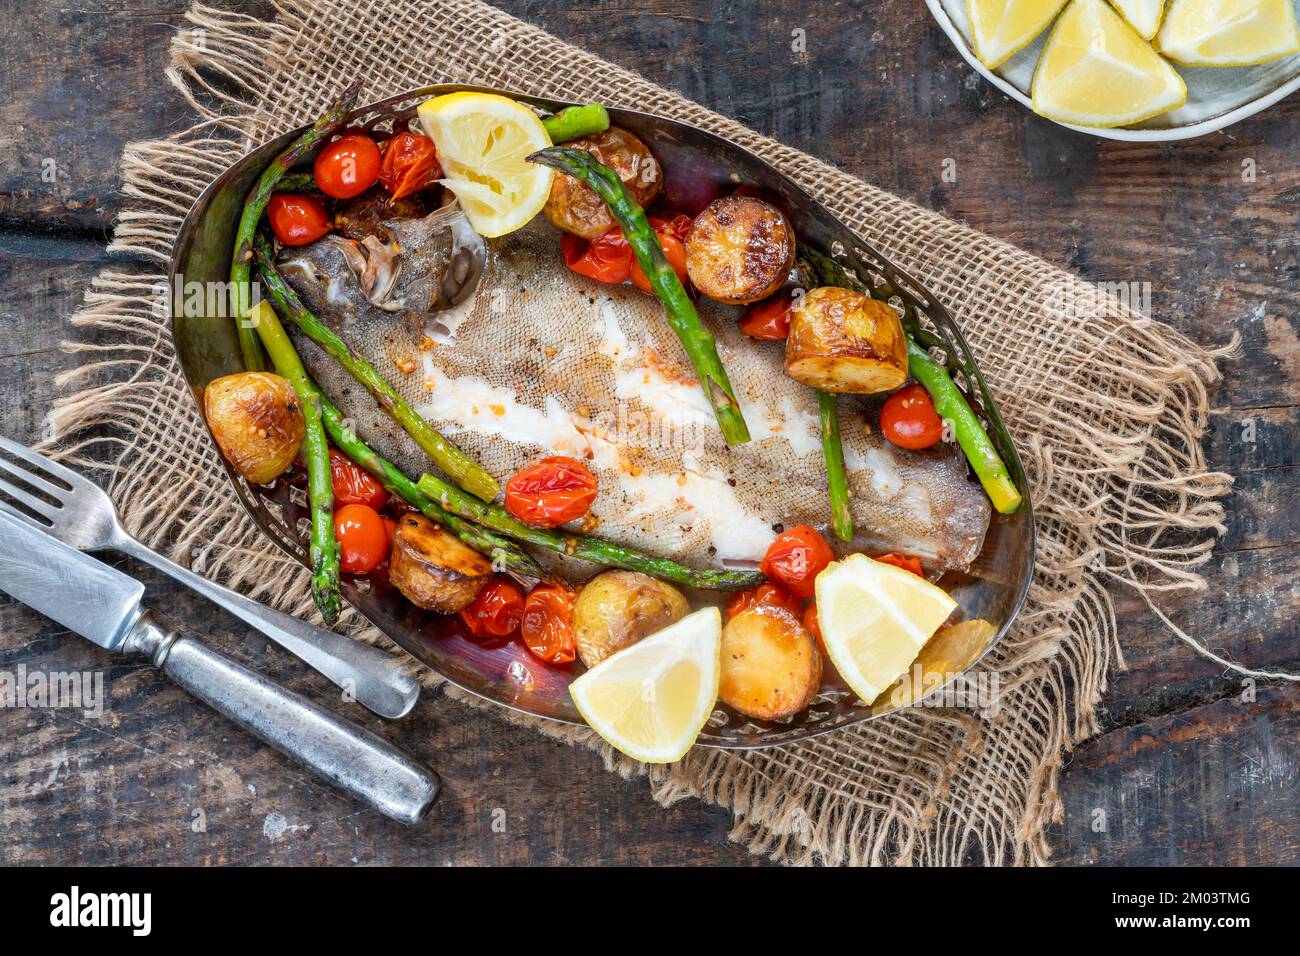 Lemon sole baked with potatoes, baby tomatoes and asparagus Stock Photo